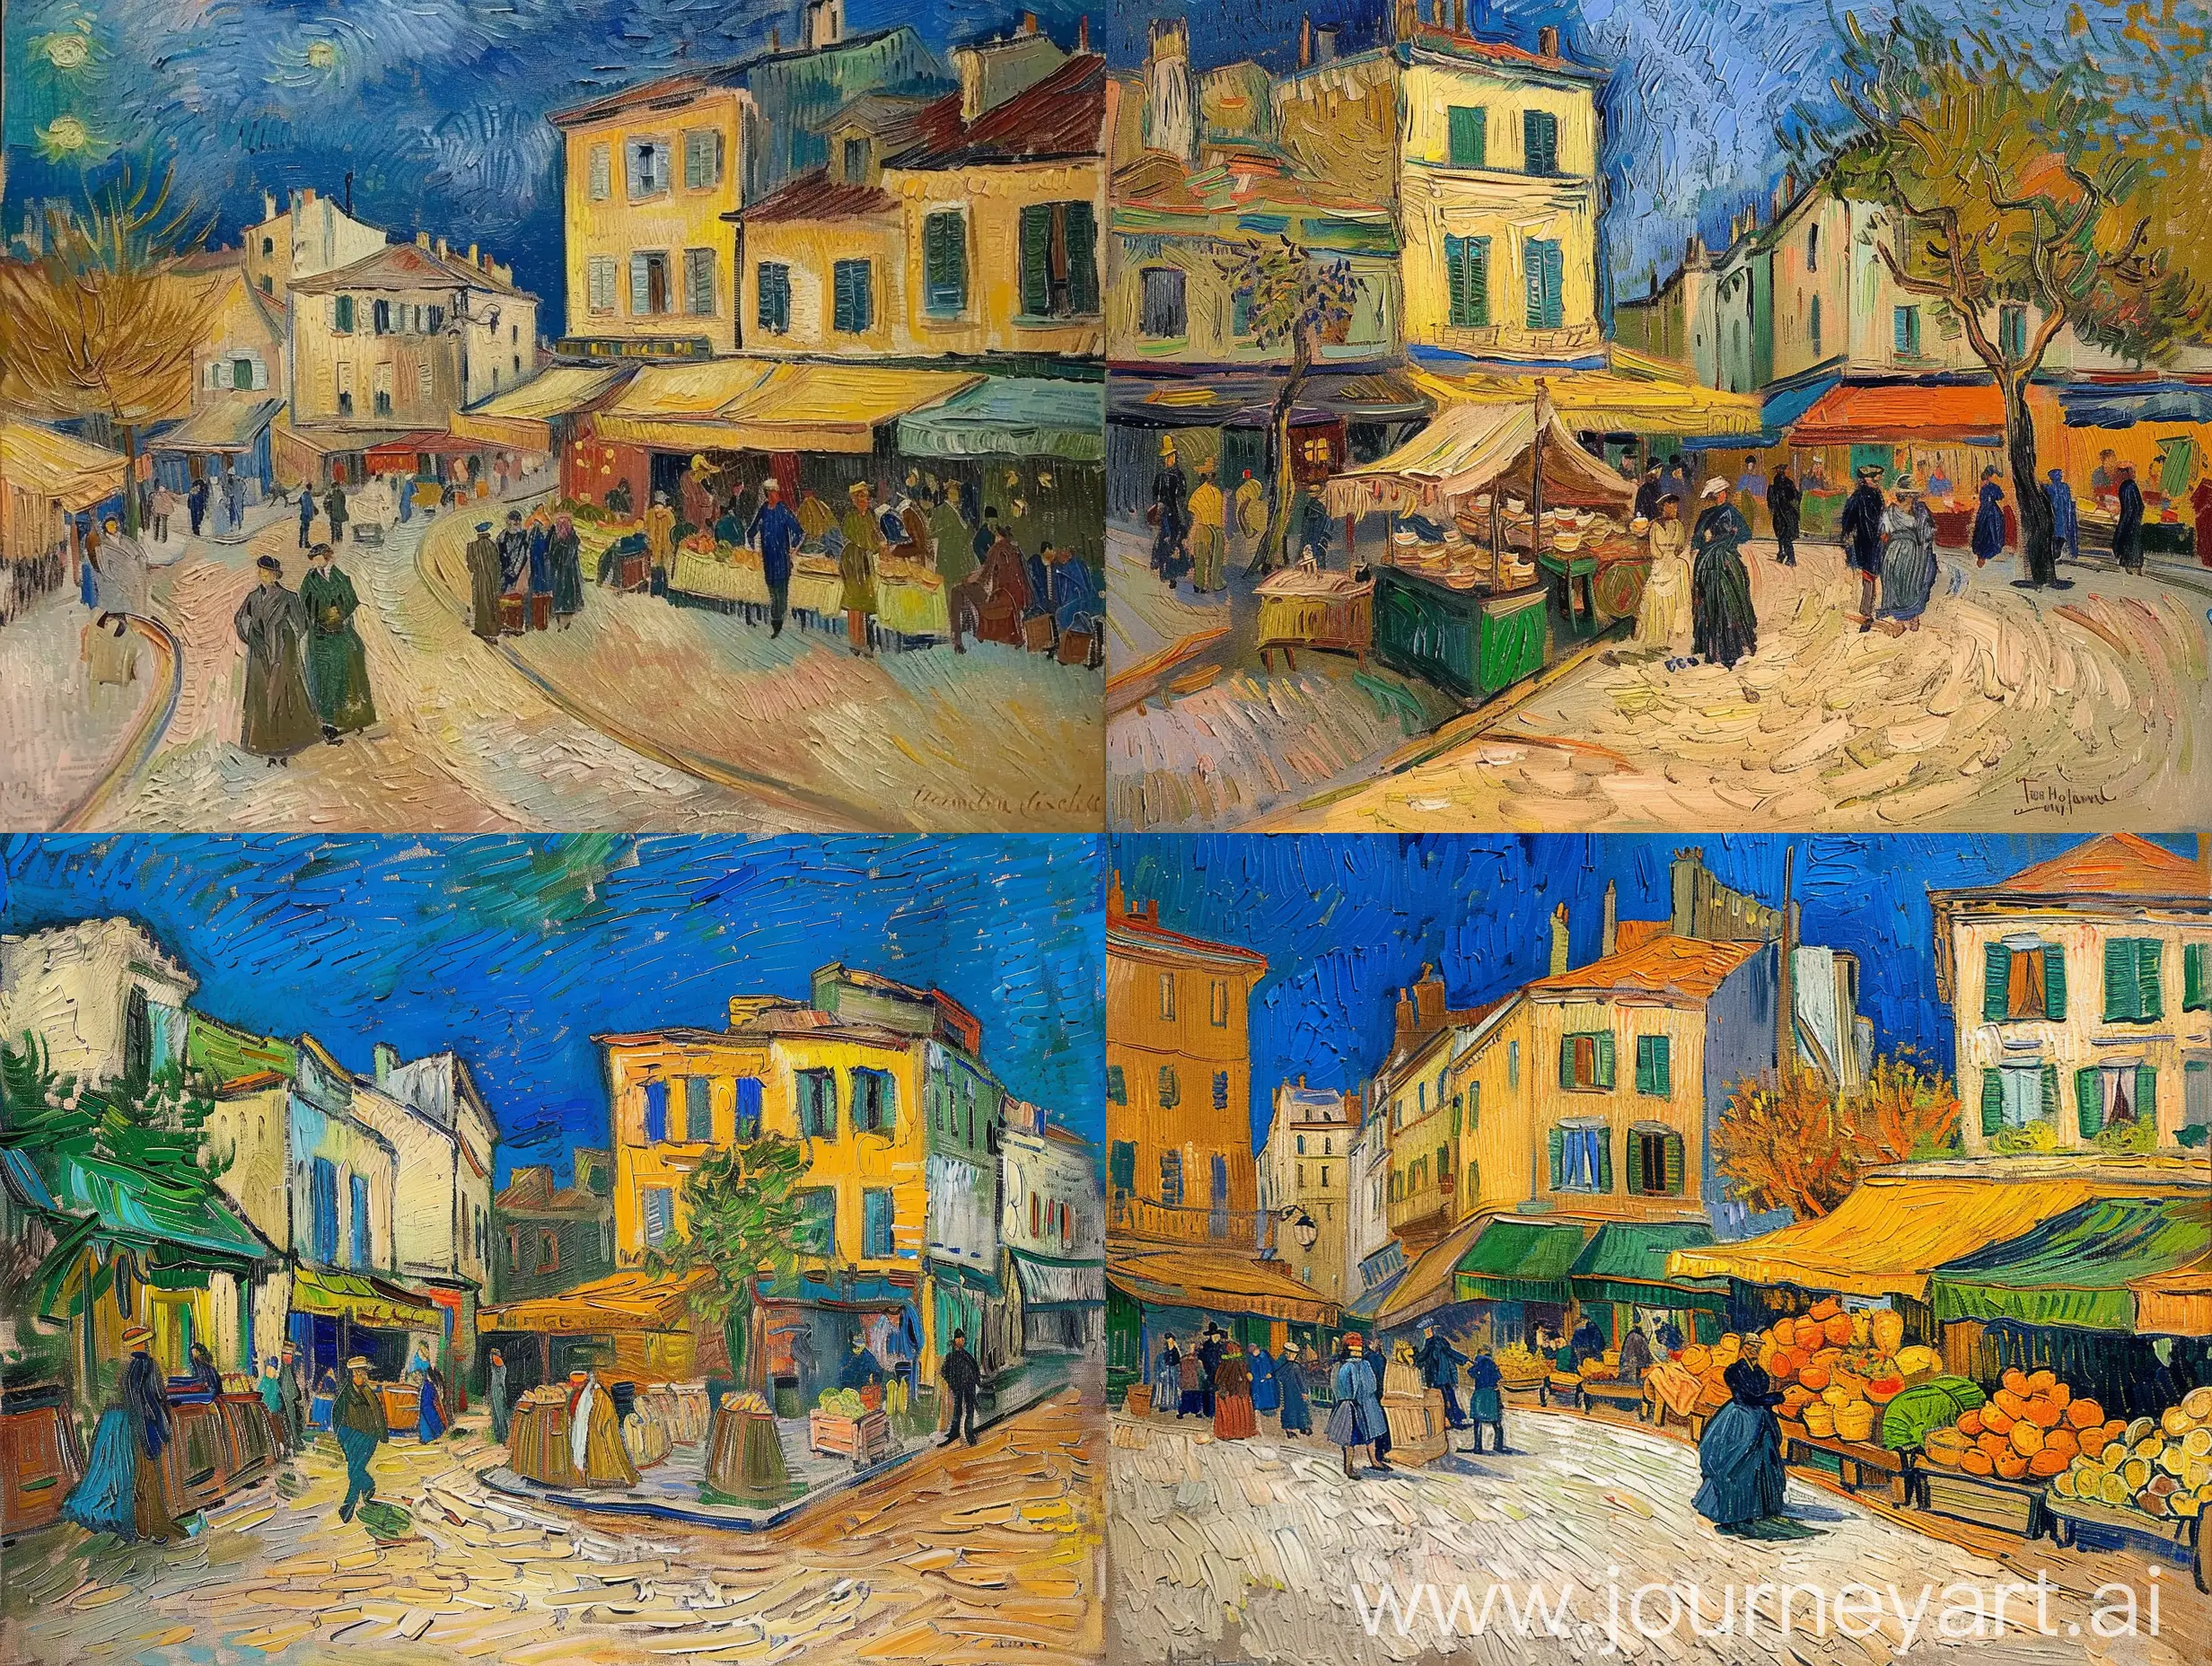 Vibrant-Oil-Painting-of-a-City-Marketplace-in-Van-Gogh-Style